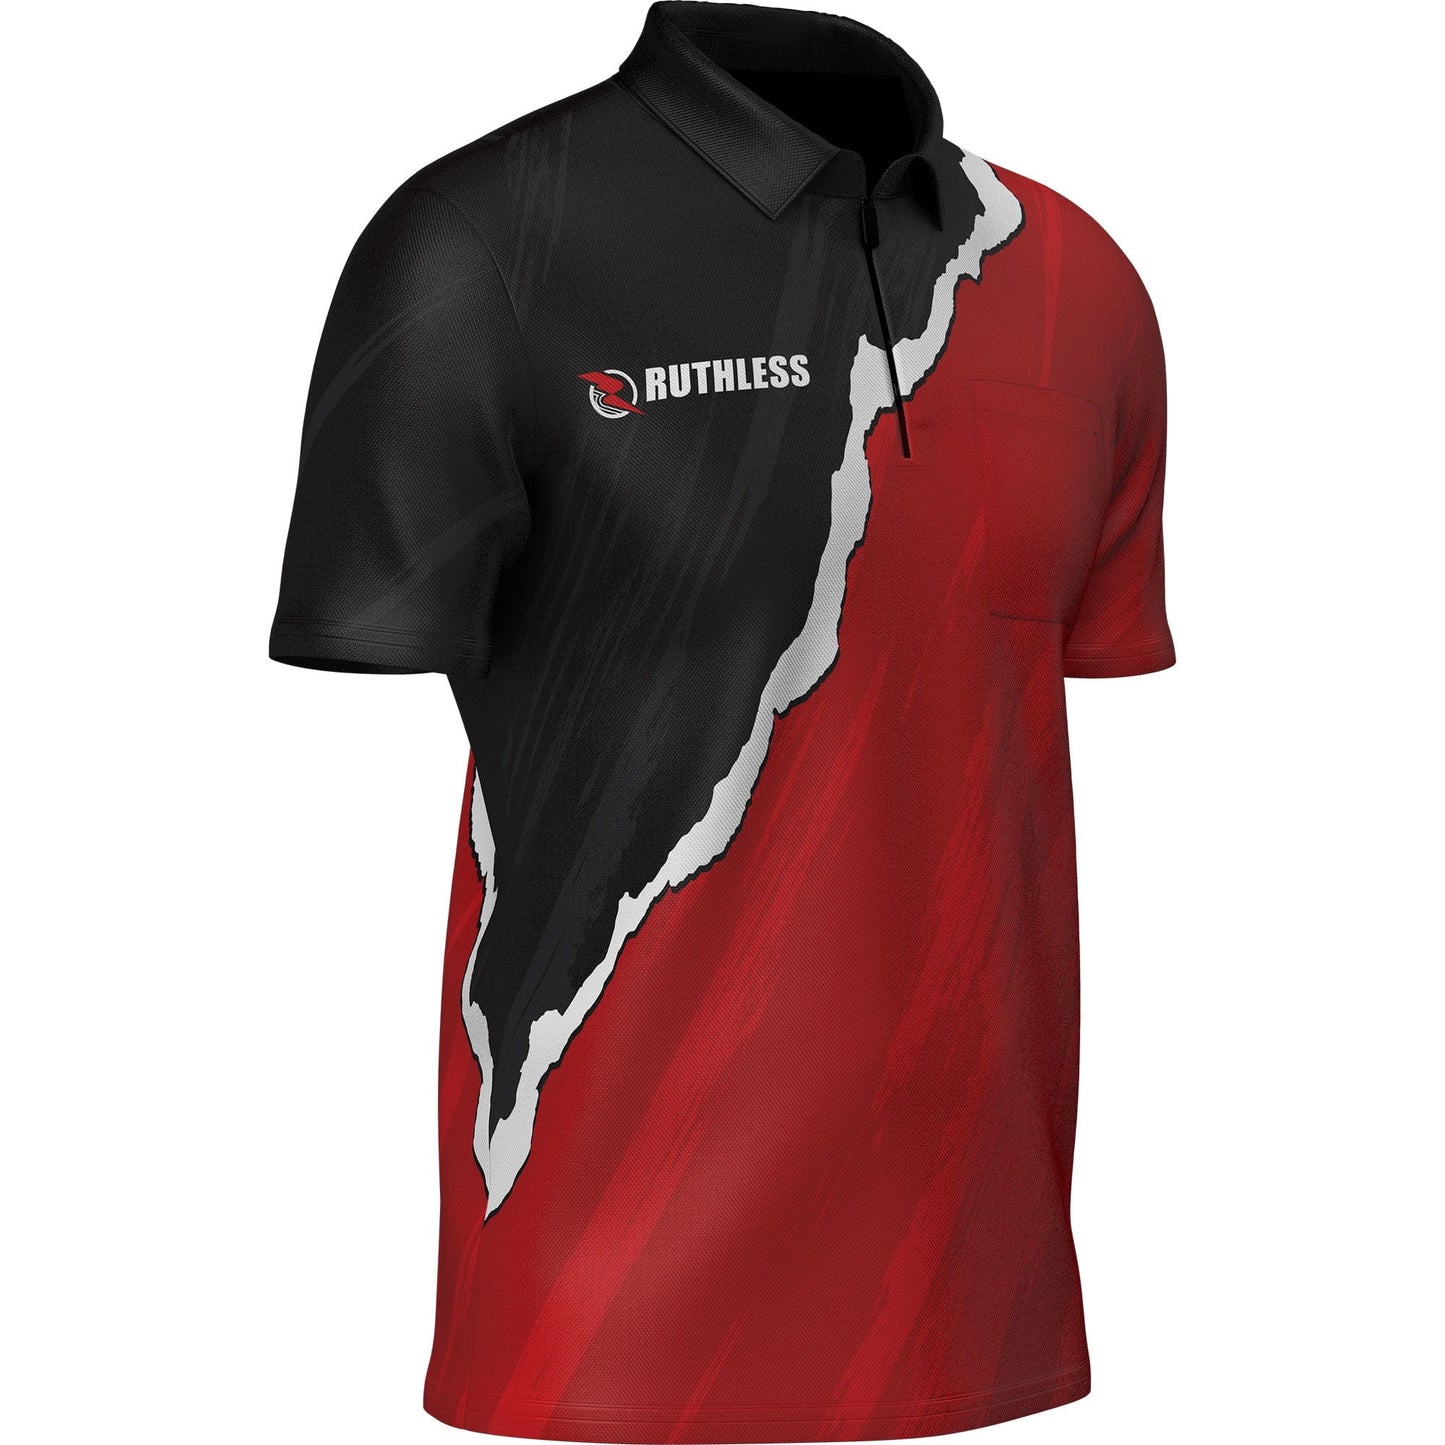 Ruthless RipTorn ECO Dart Shirt - with Pocket - Black & Red